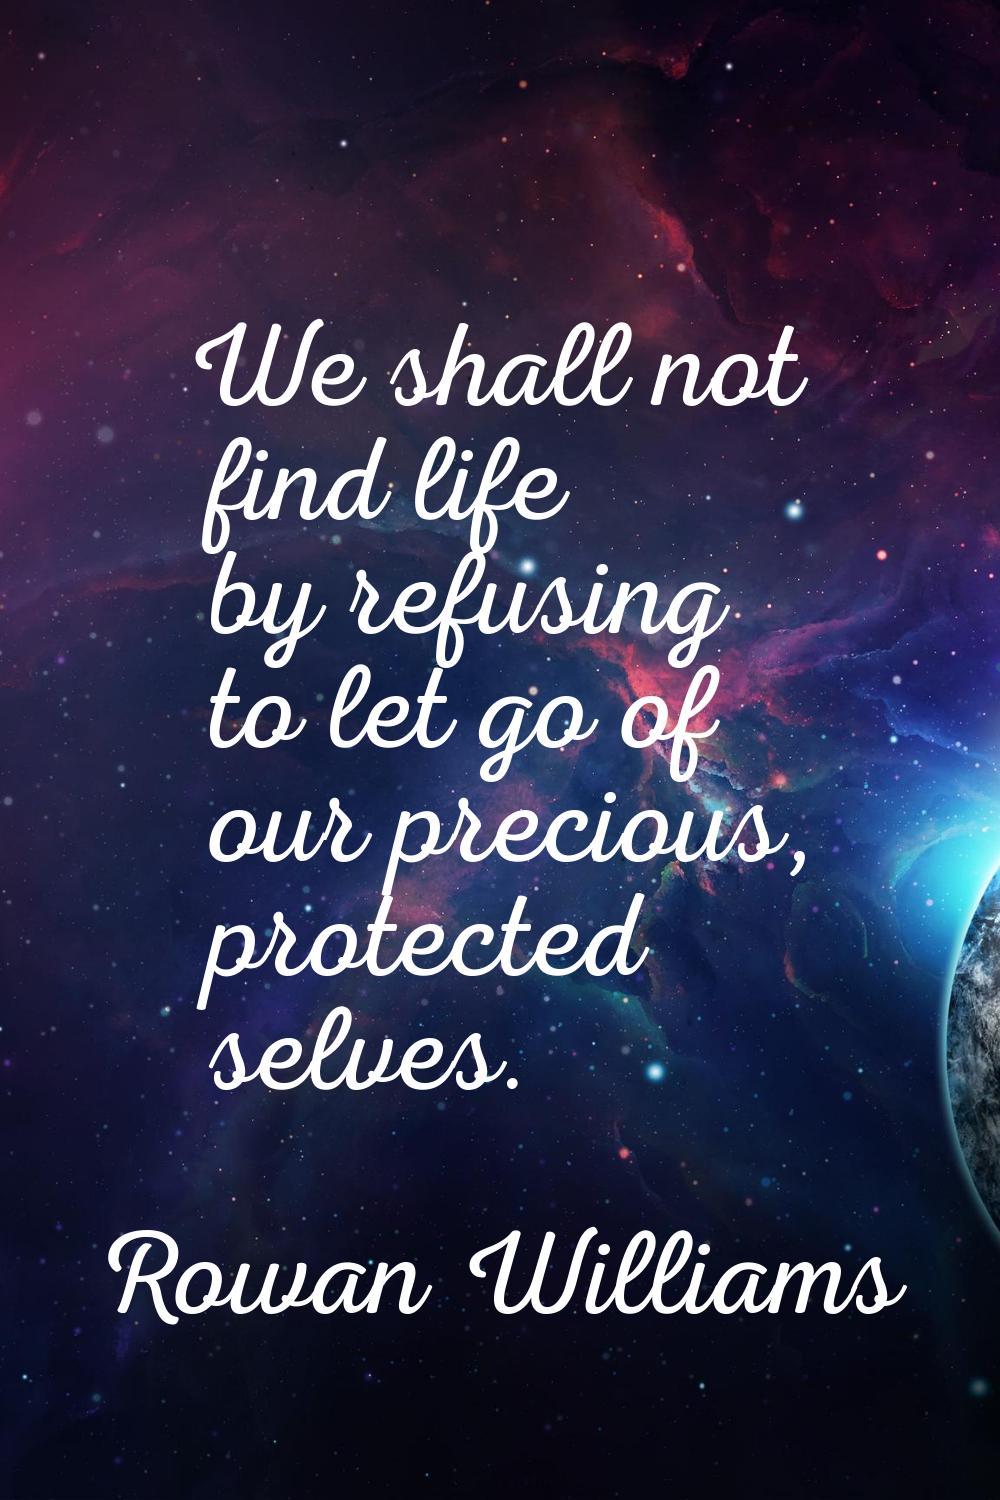 We shall not find life by refusing to let go of our precious, protected selves.